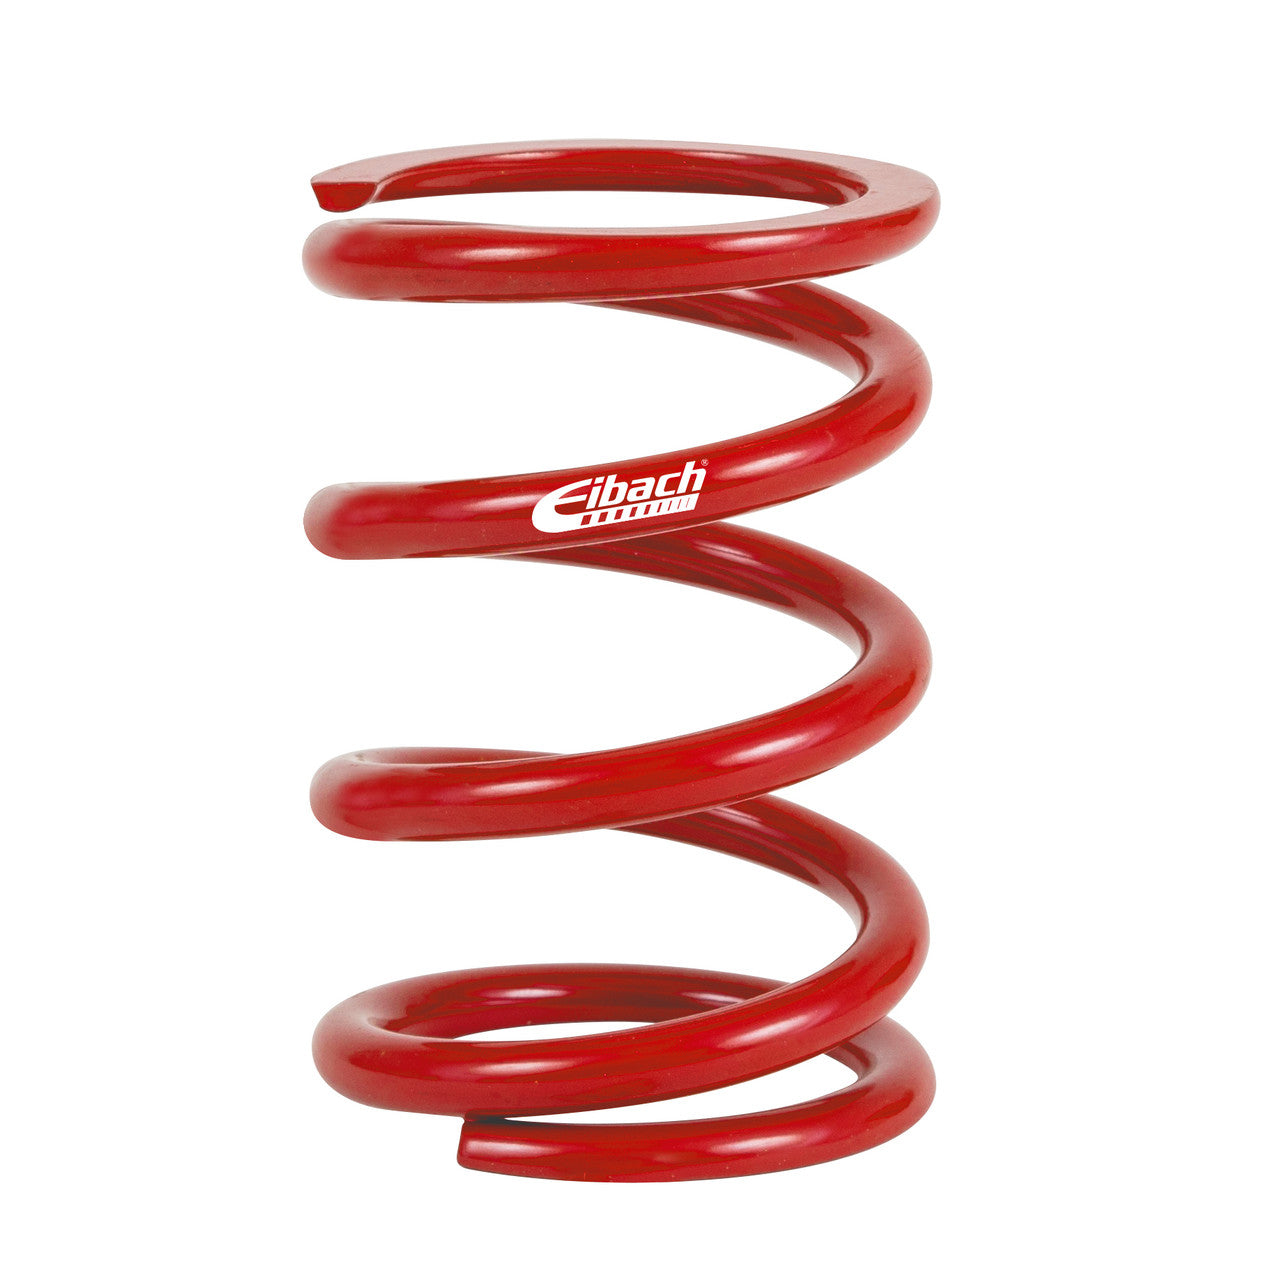 Eibach Metric Coilover Spring - 60MM I.D. 100-60-0100